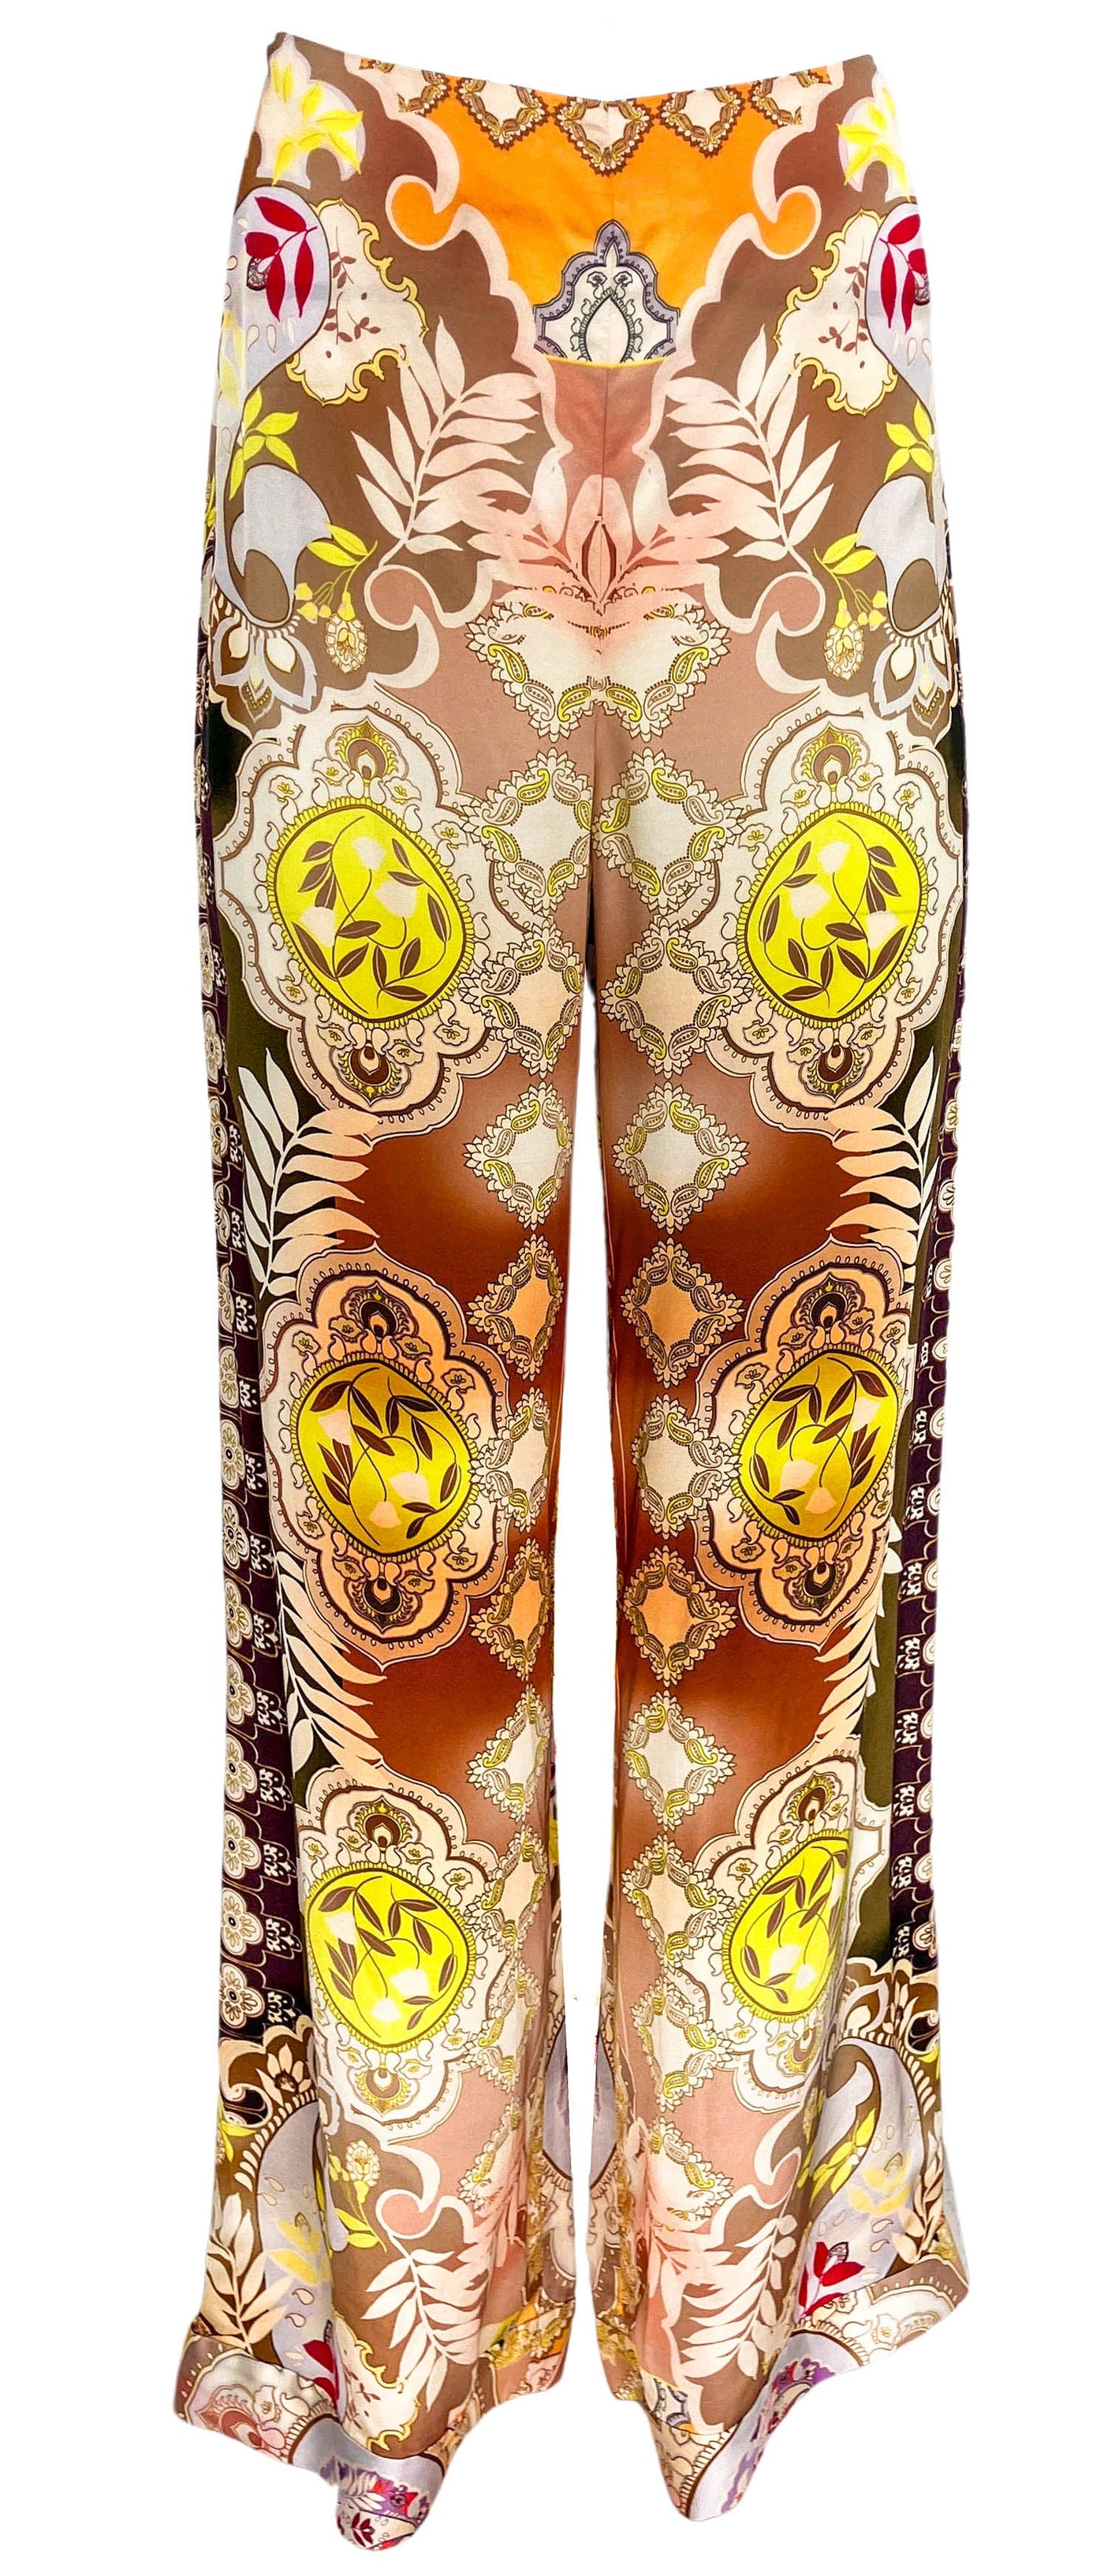 Alexis Geneve Pant in Paisley Blossom - Discounts on Alexis at UAL